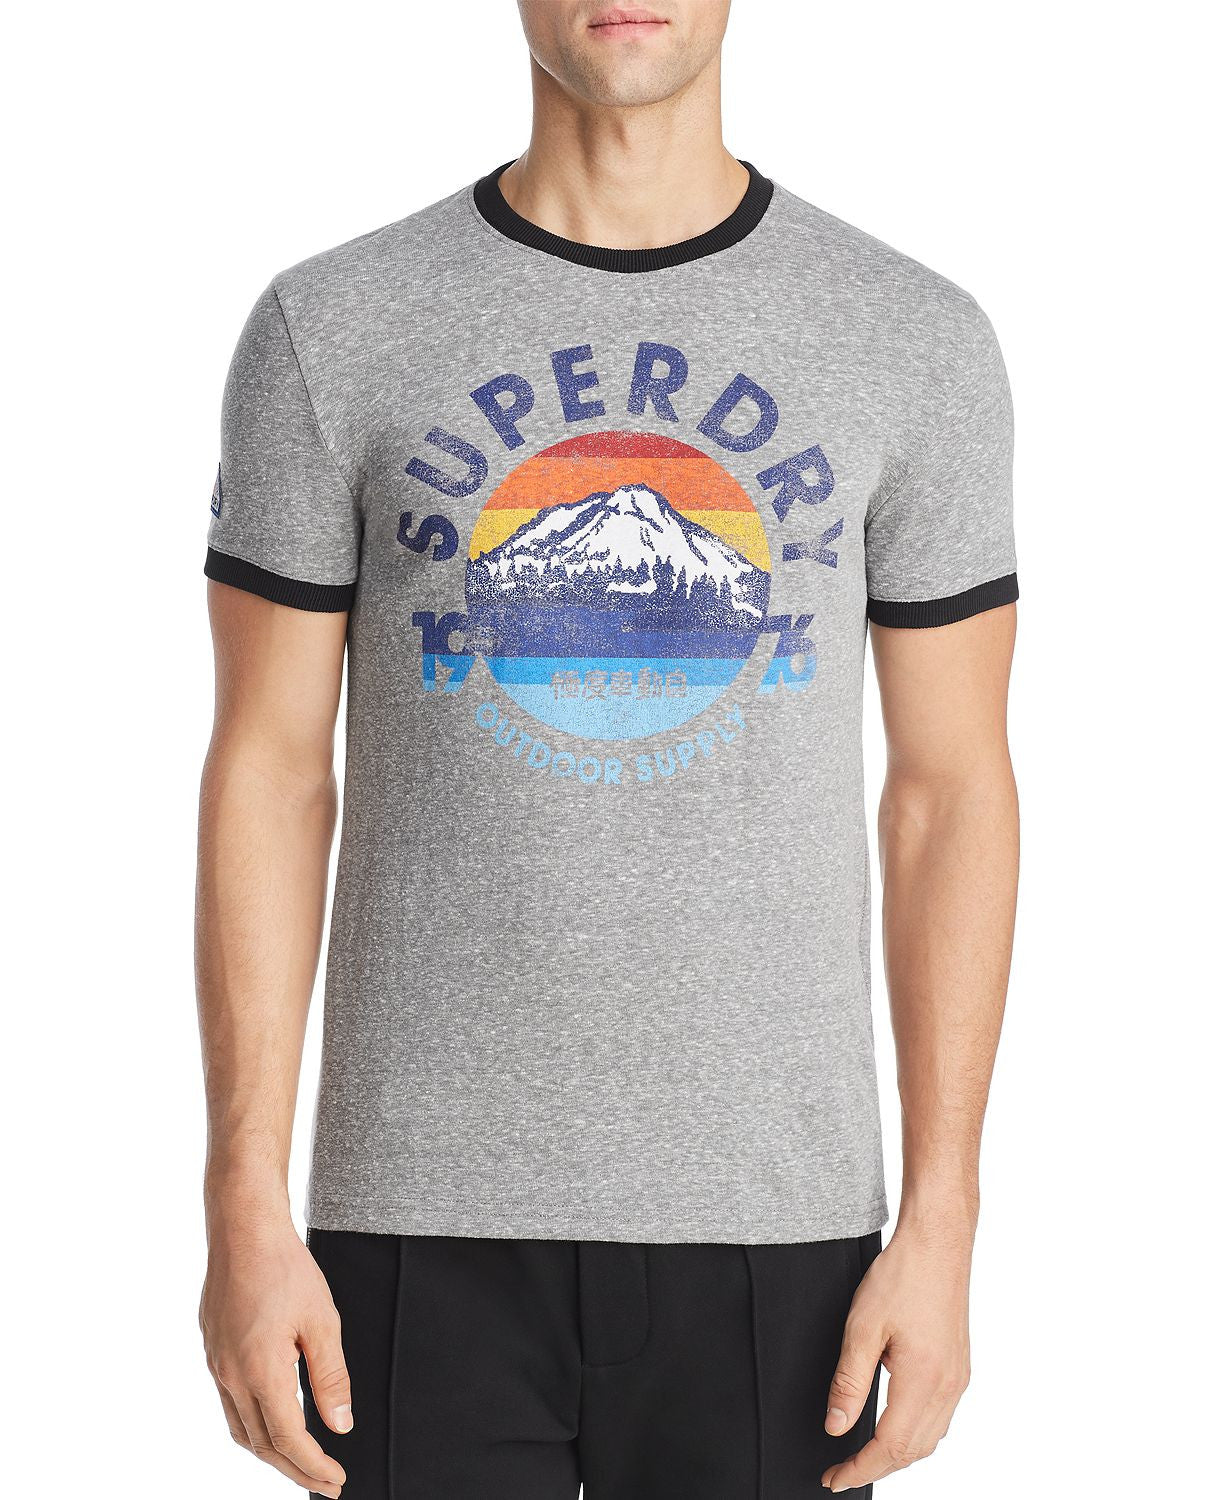 Superdry 76 Graphic Ringer Tee Grey Snowy